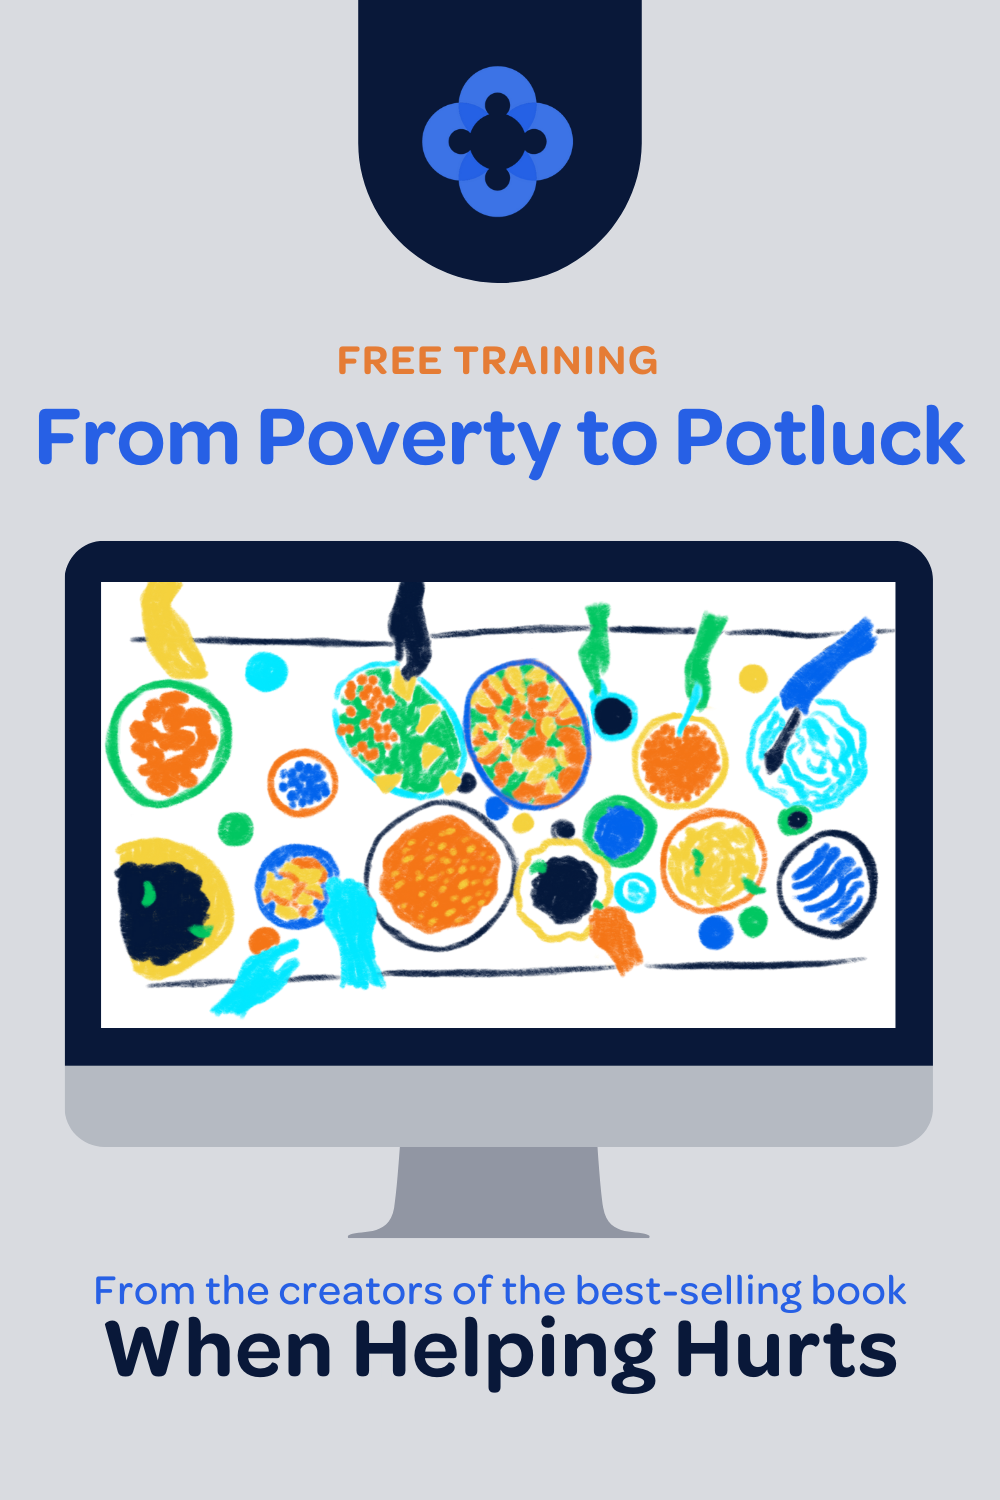 how a potluck approach to poverty alleviation can lead to lasting change